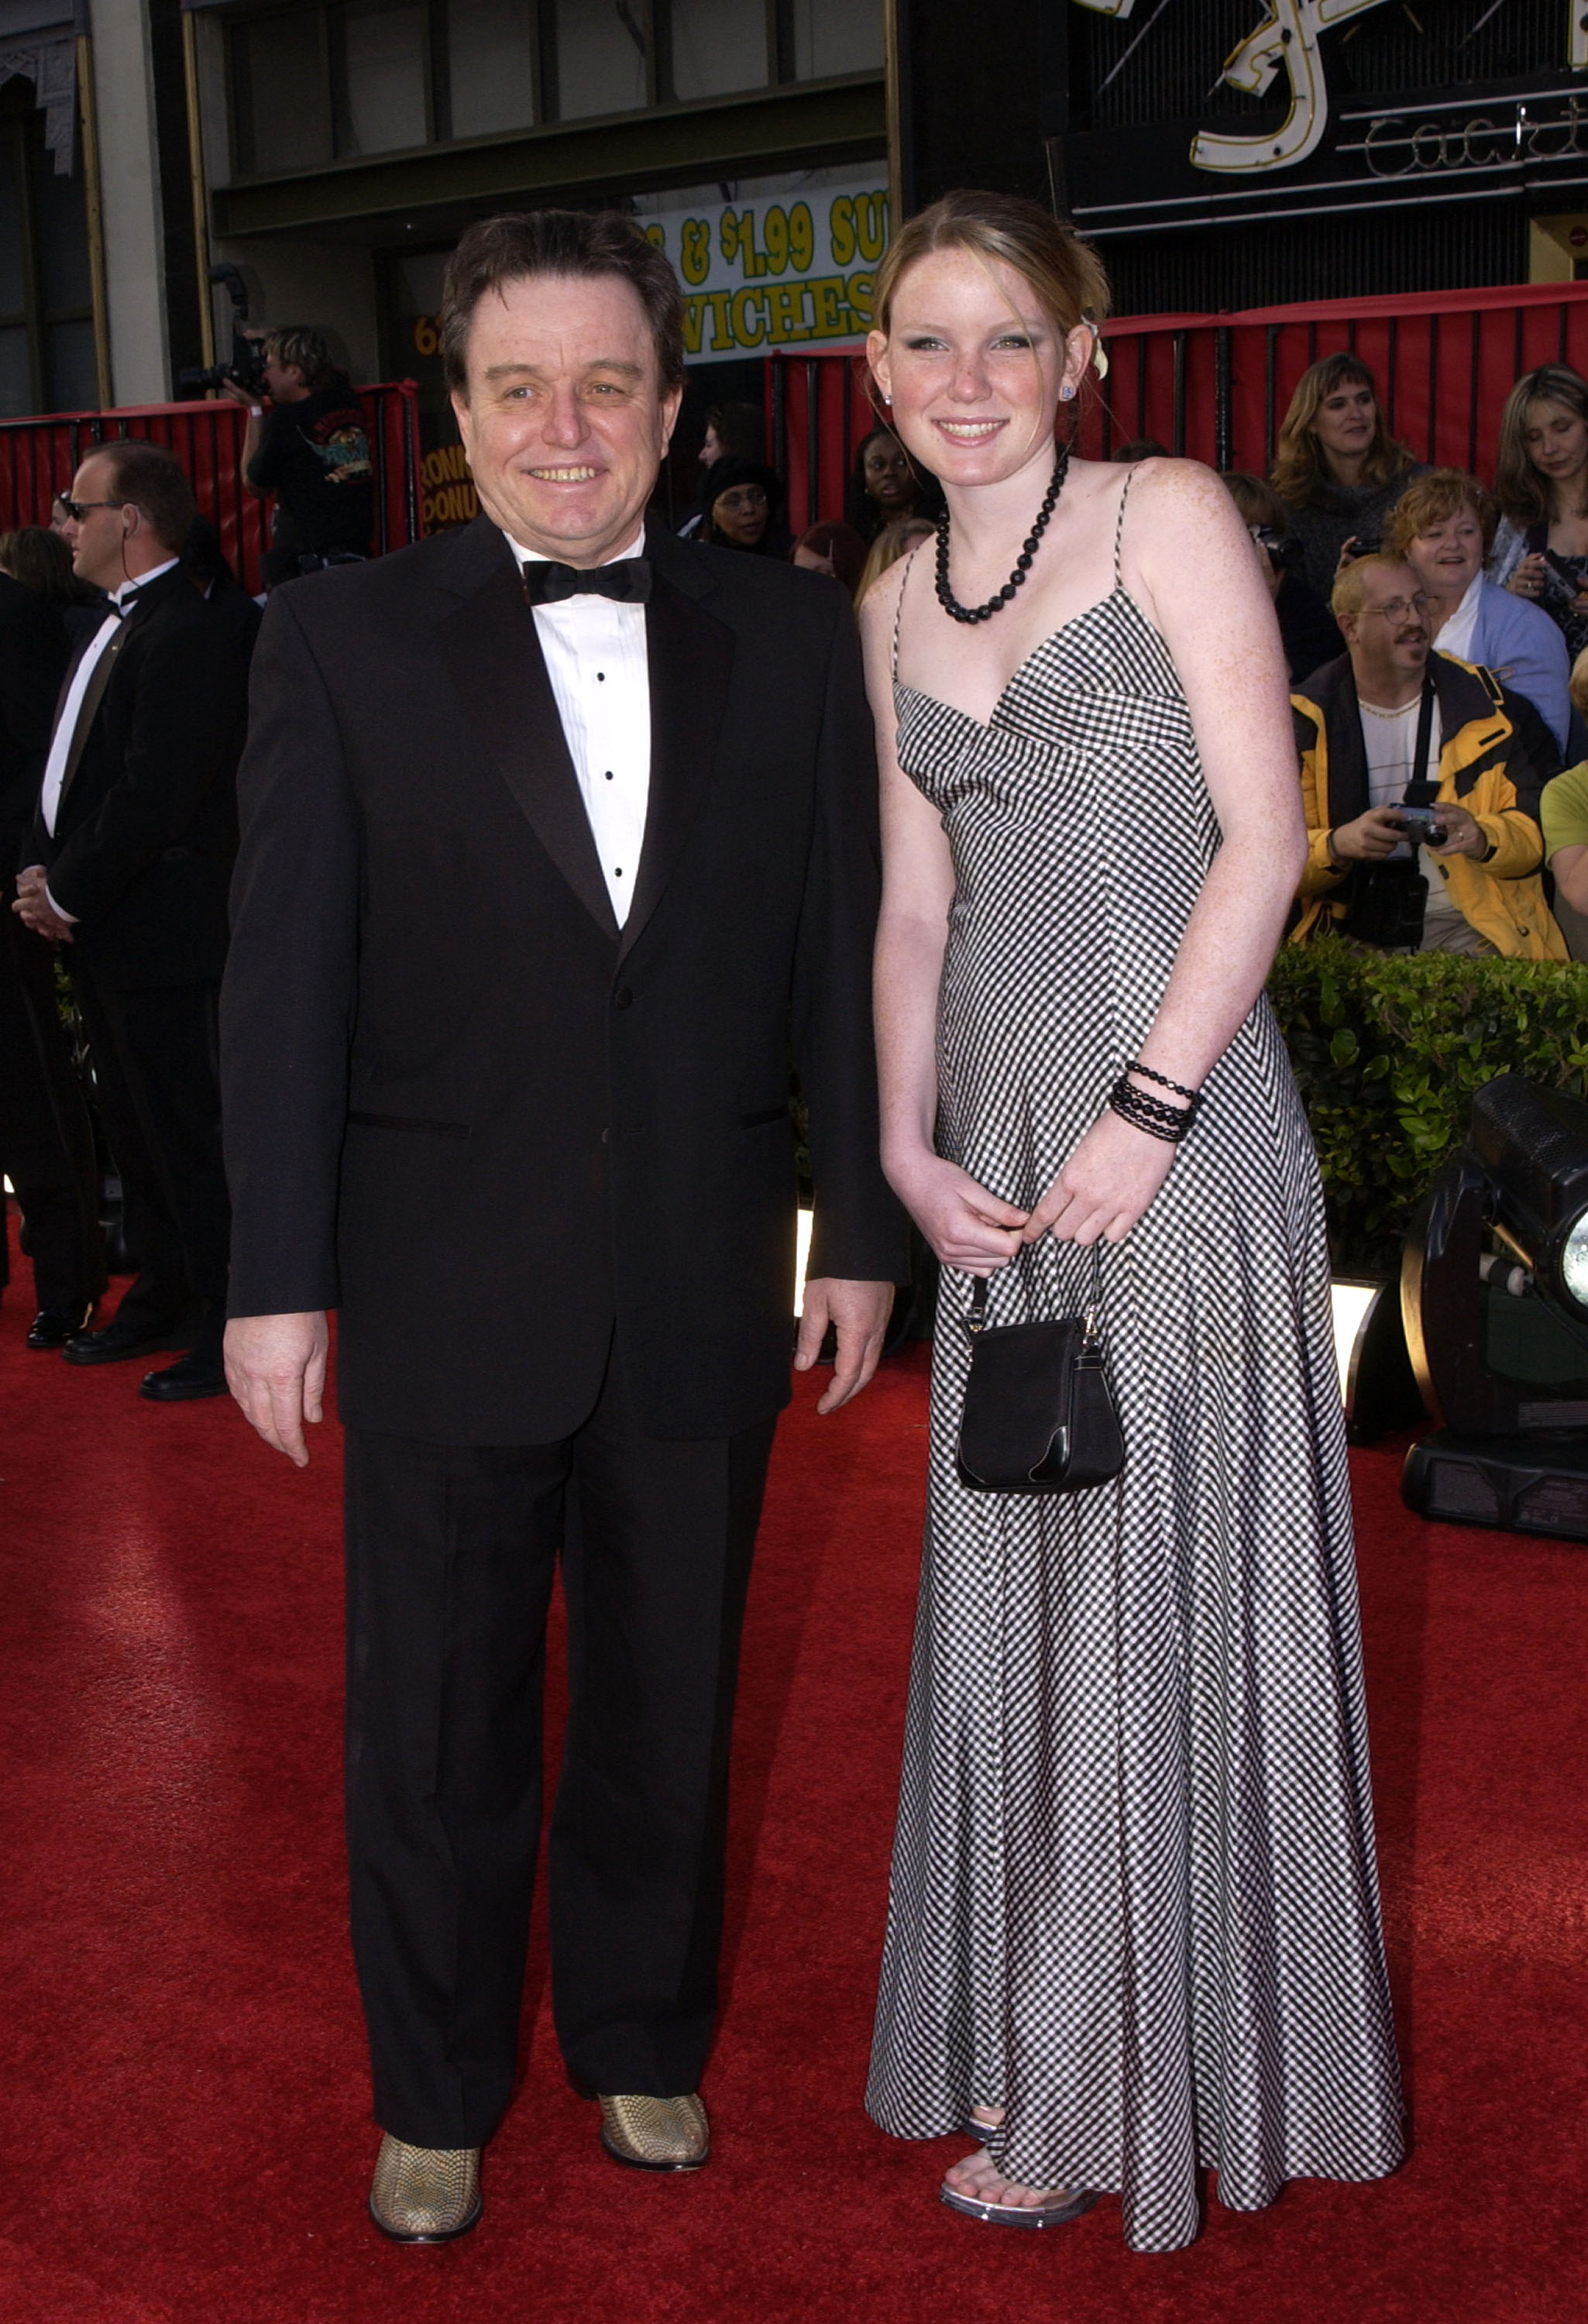 Jerry Mathers with his daughter in Hollywood, California on March 6, 2003. | Source: Getty Images